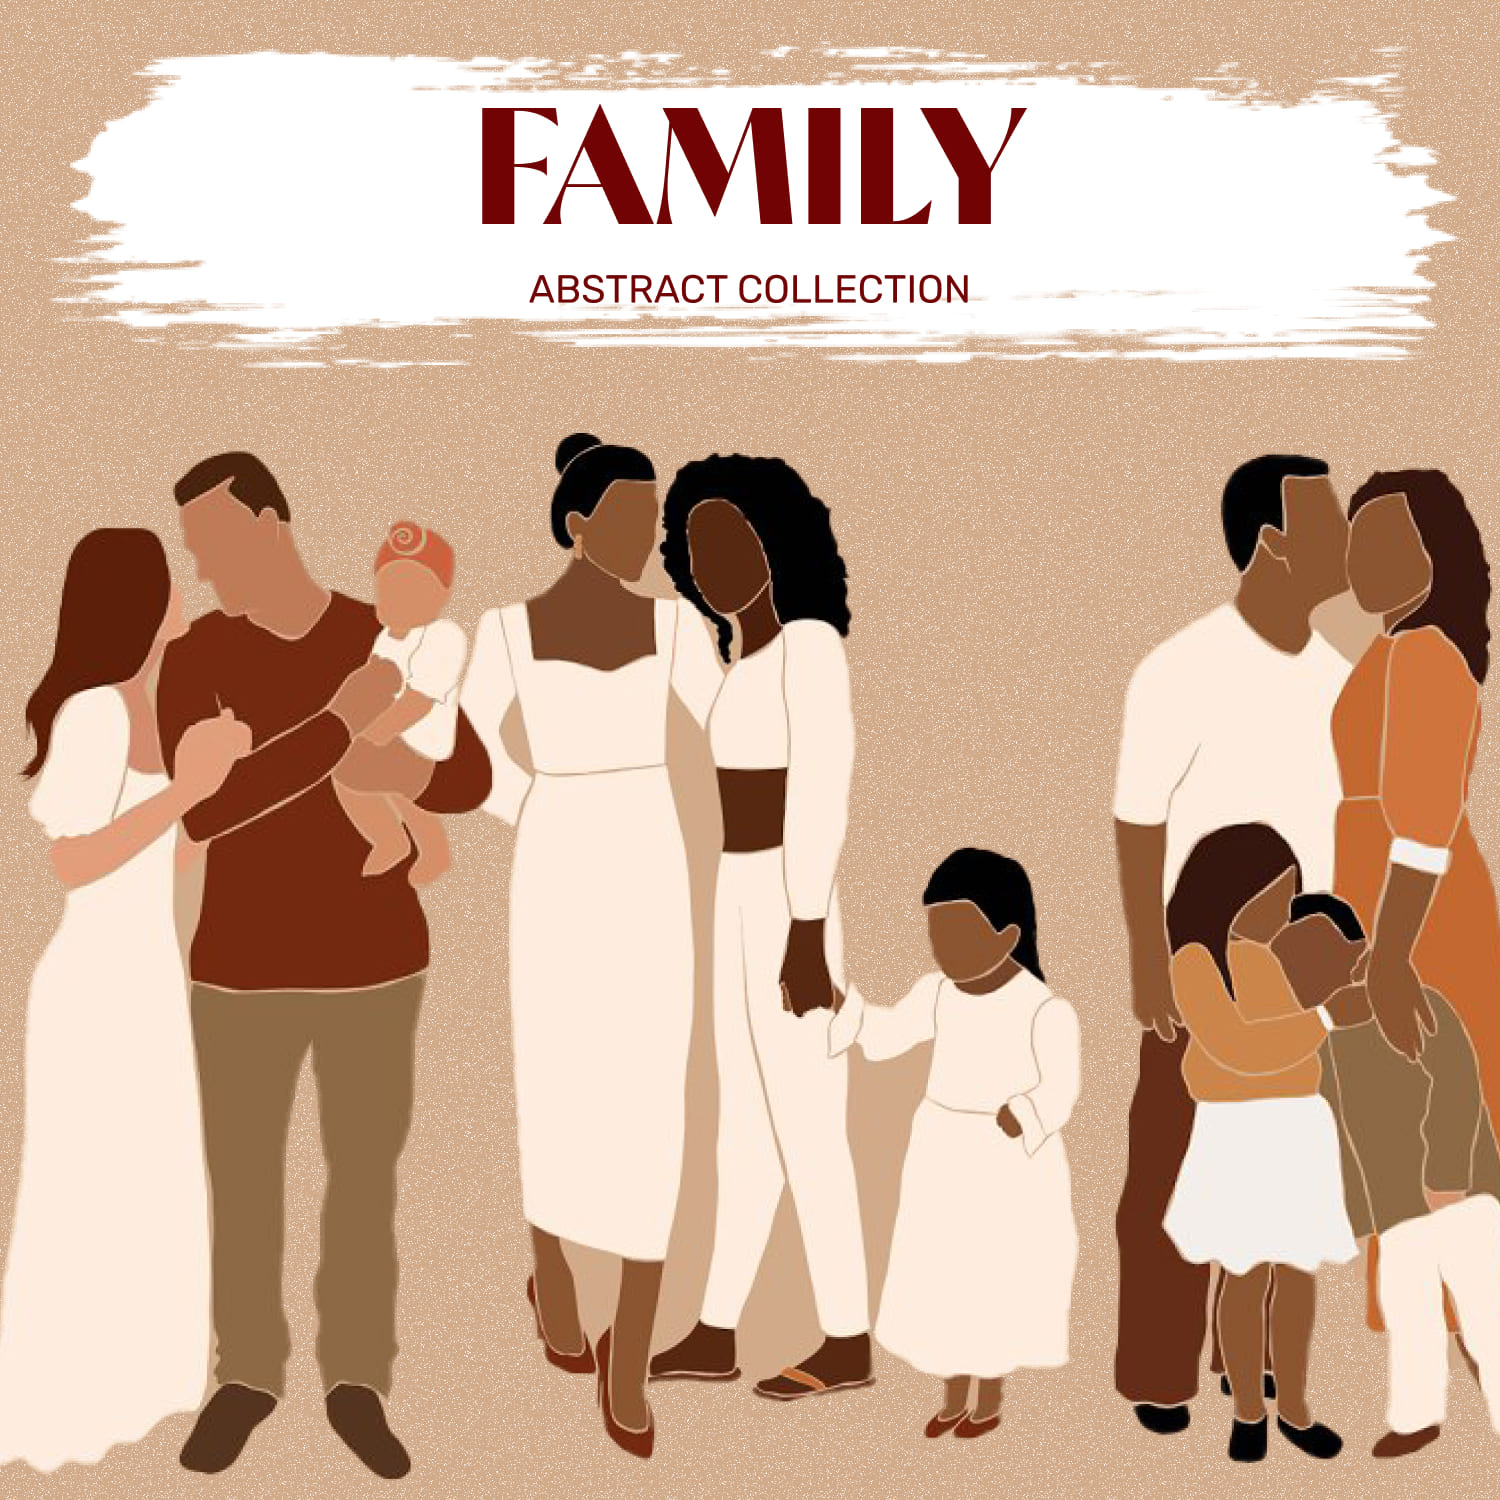 Abstract Family Collection.